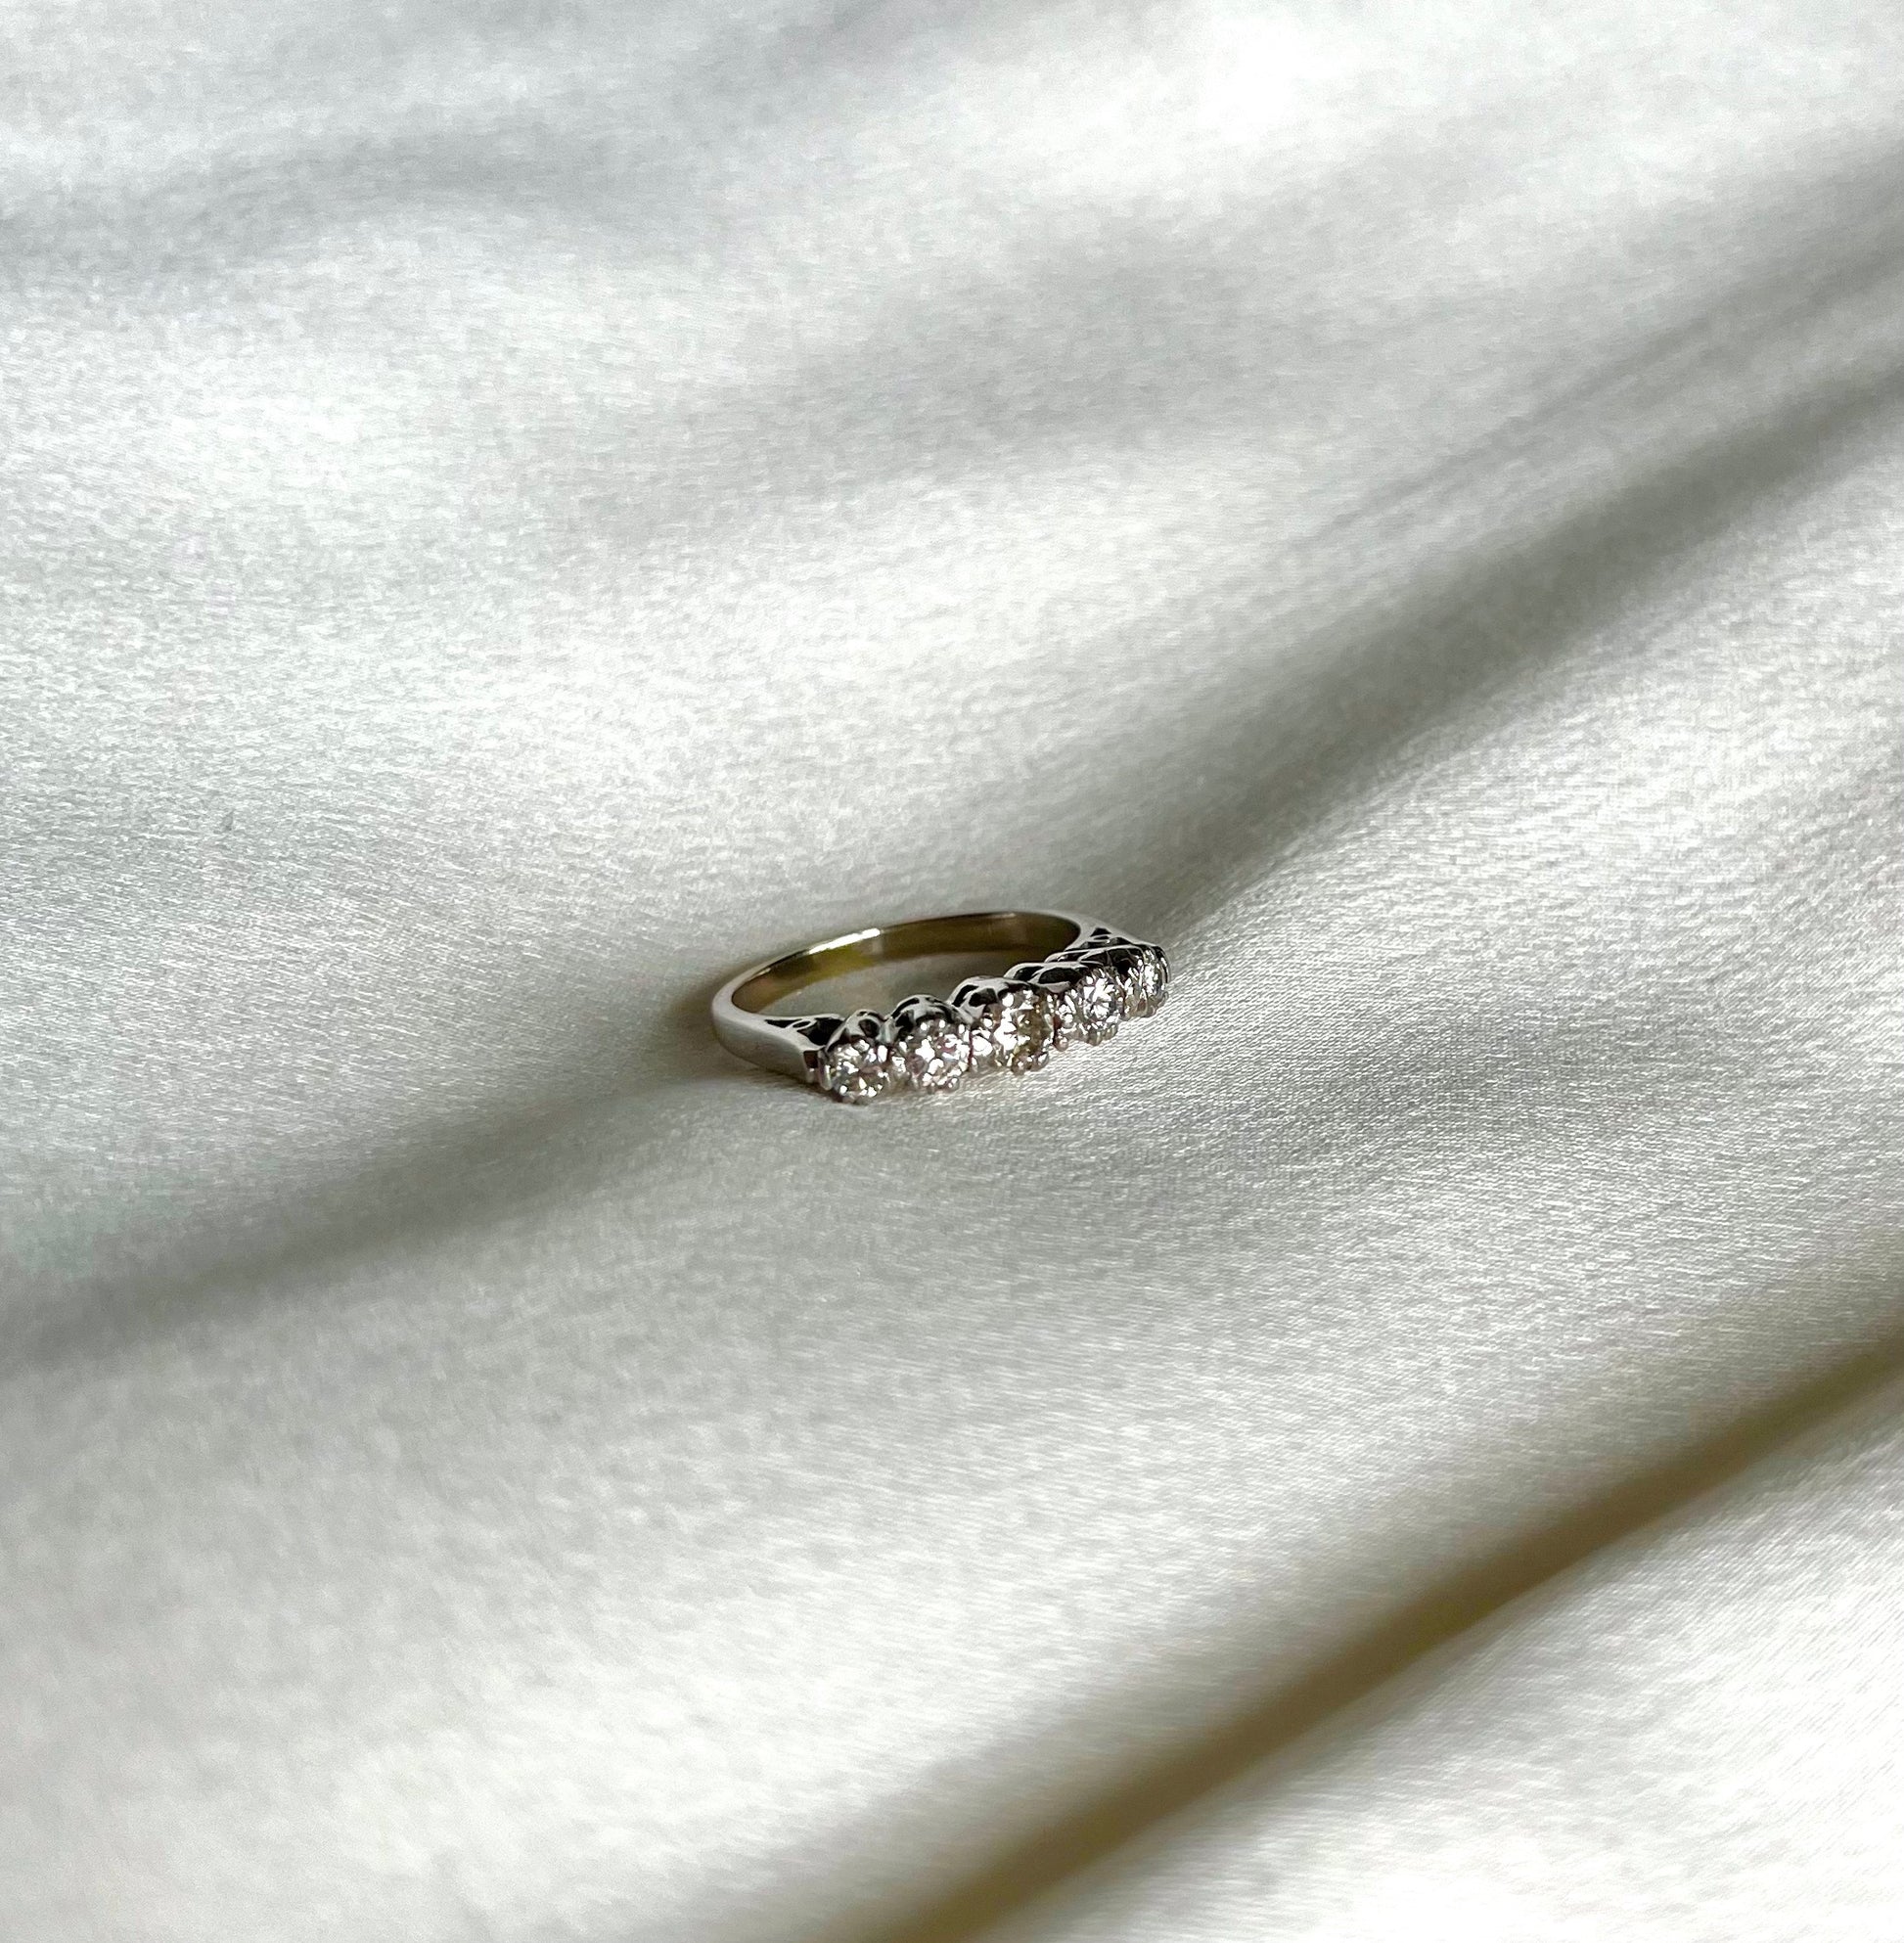 Vintage 18ct White Gold Diamond 5 Stone Ring 0.5ct weight, Size L UK Eternity or Engagement Ring Independently Assessed